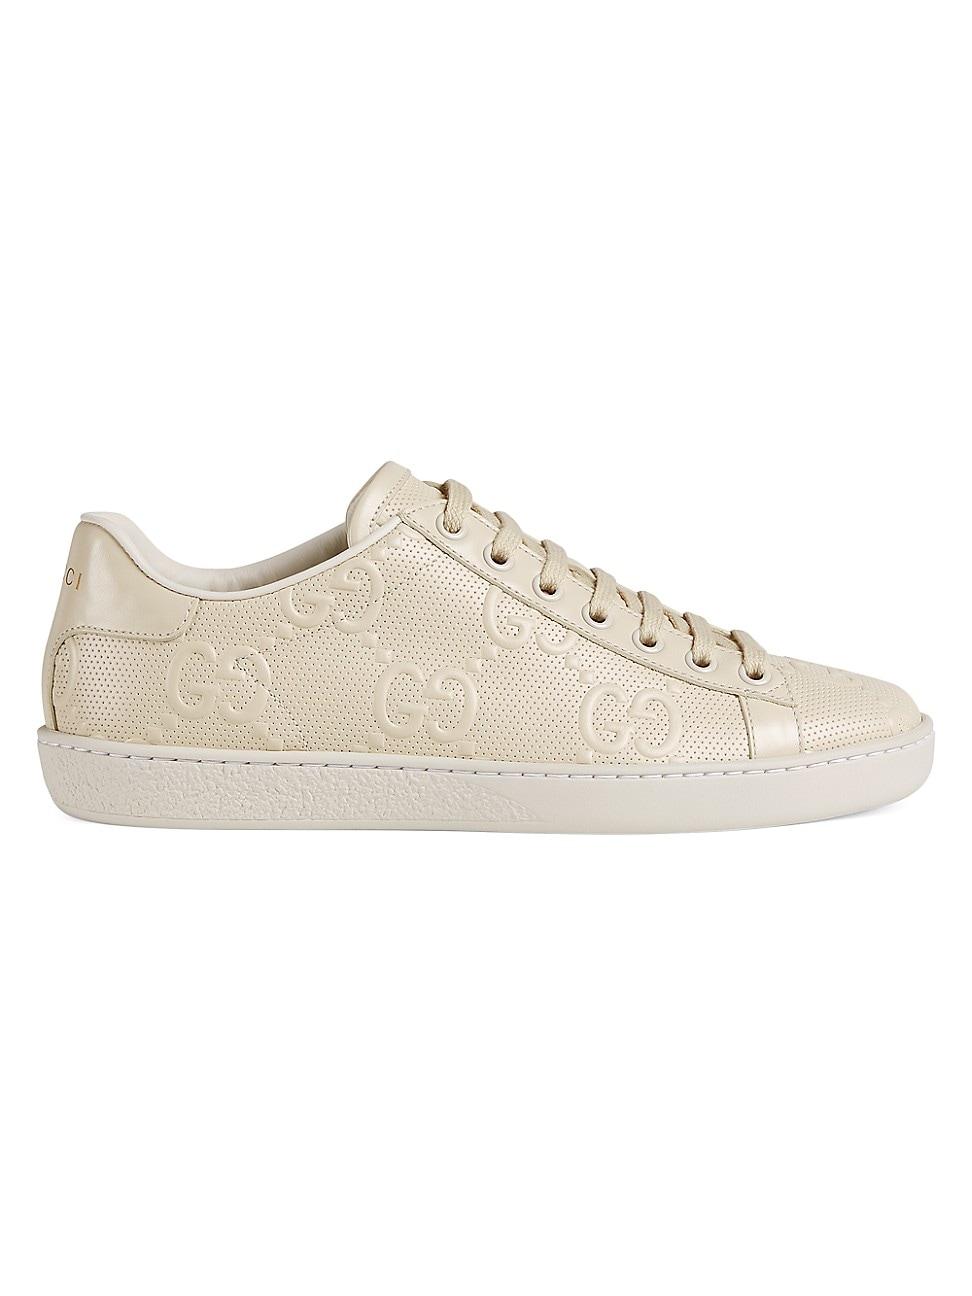 Gucci White Leather Embossed Python Trim Web Detail Embellishment Ace Low  Top Sneakers Size 40 Gucci